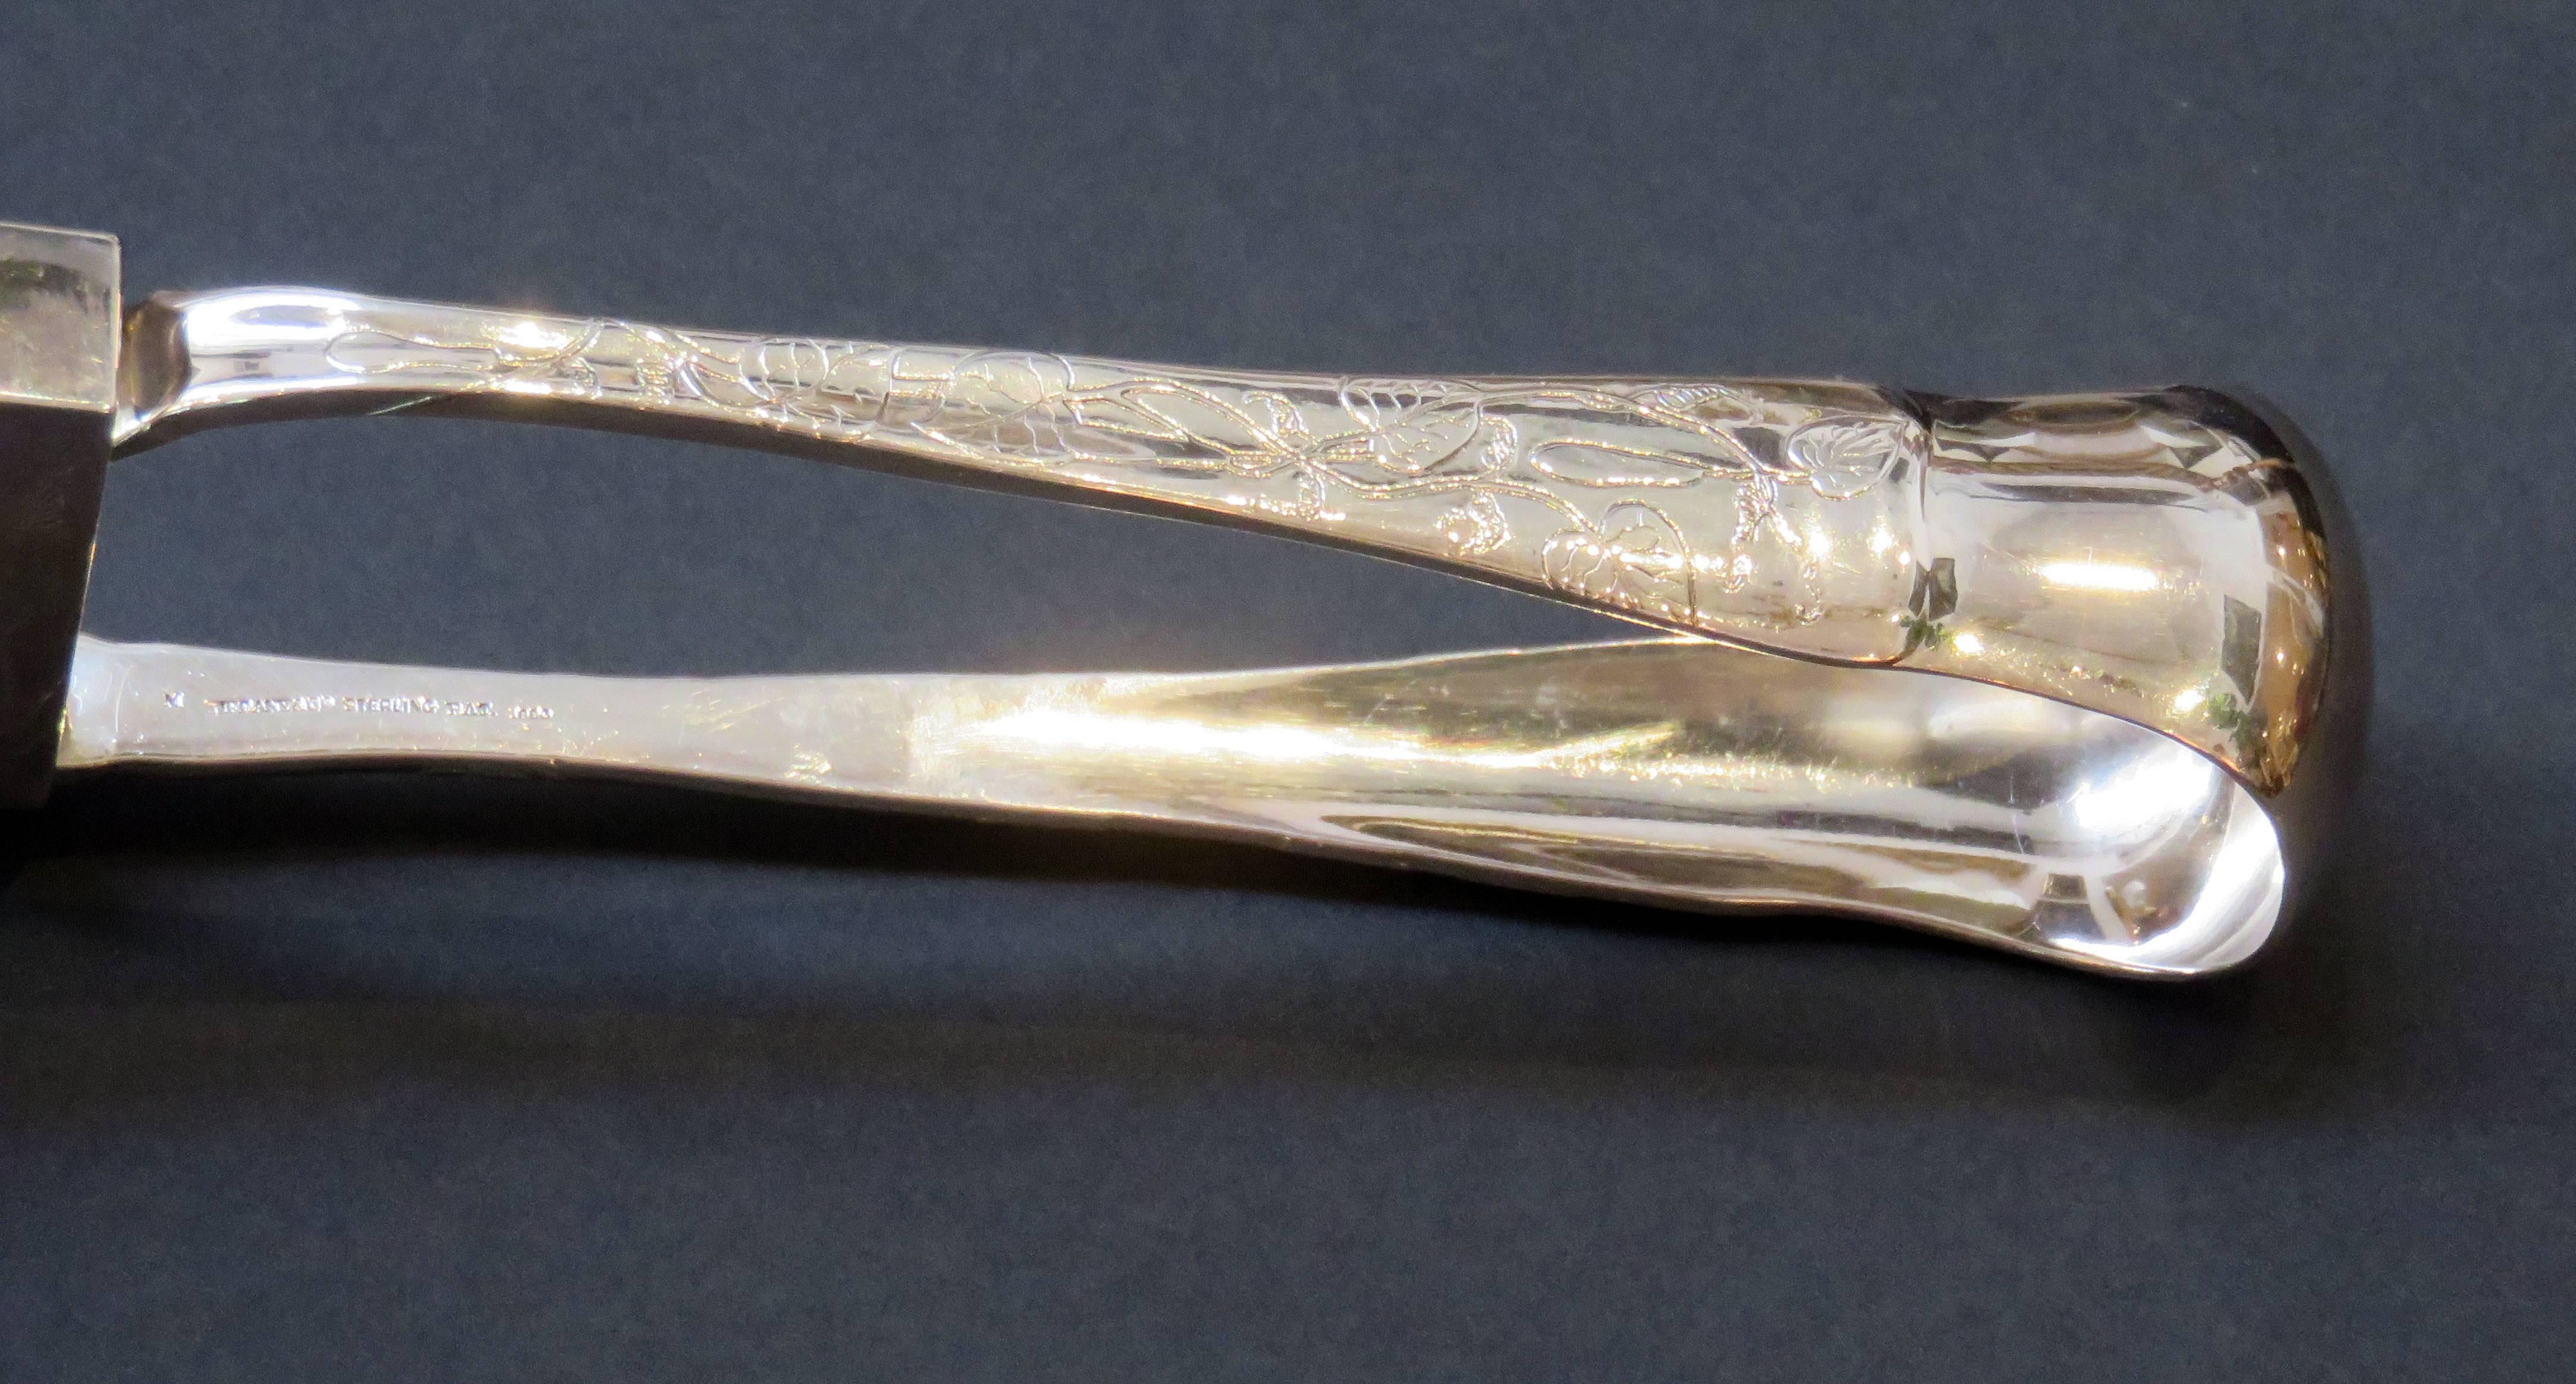 A Tiffany & Company sterling silver lap over edge acid etched asparagus tongs in the yoked bow style. Engraved with a stags head on the end. Marked Tiffany & Company Sterling Pat. 1880, the date letter 